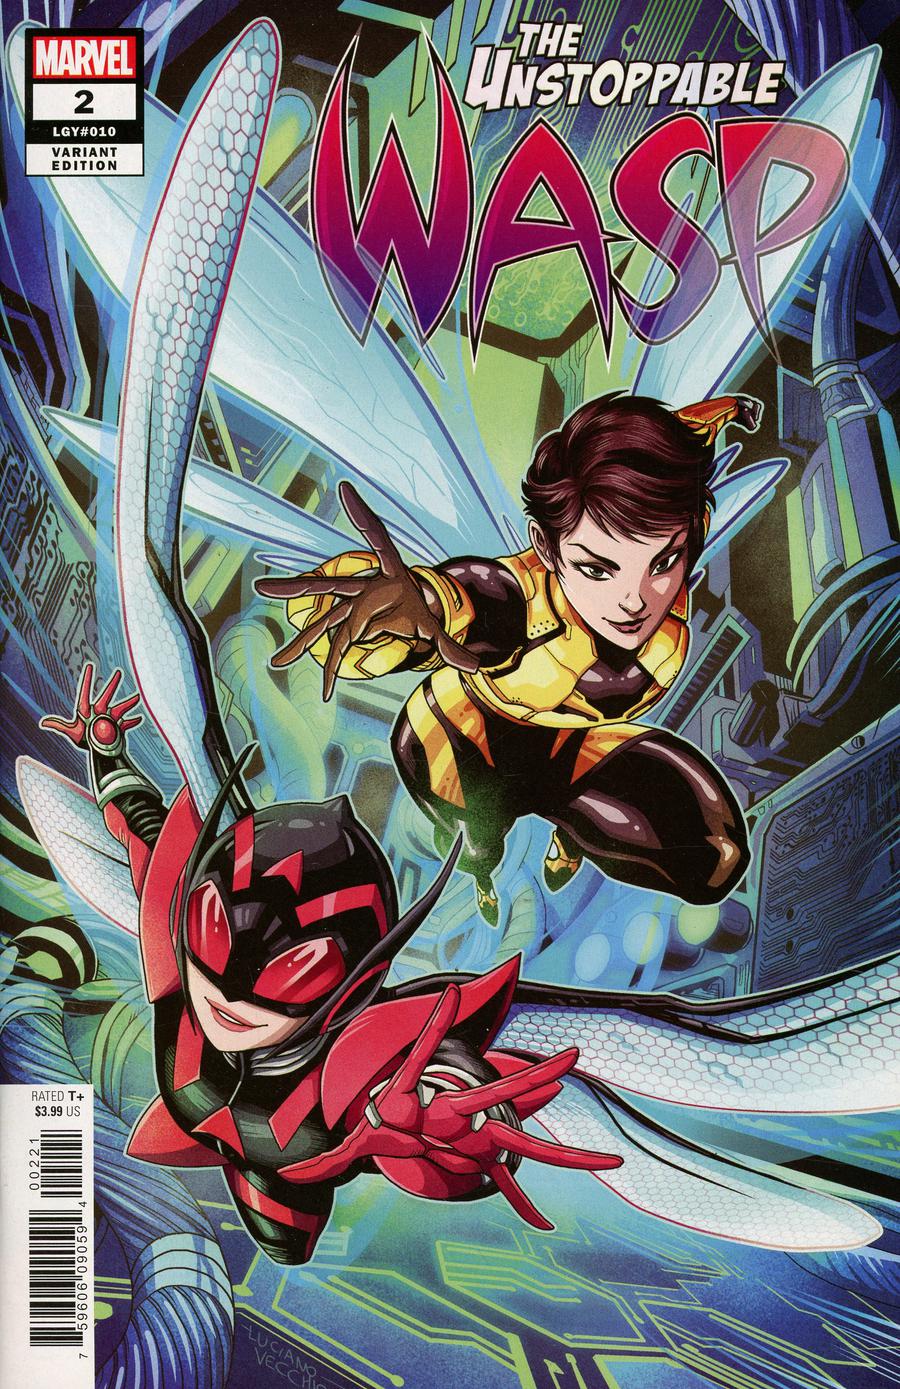 Unstoppable Wasp Vol 2 #2 Cover B Incentive Luciano Vecchio Variant Cover